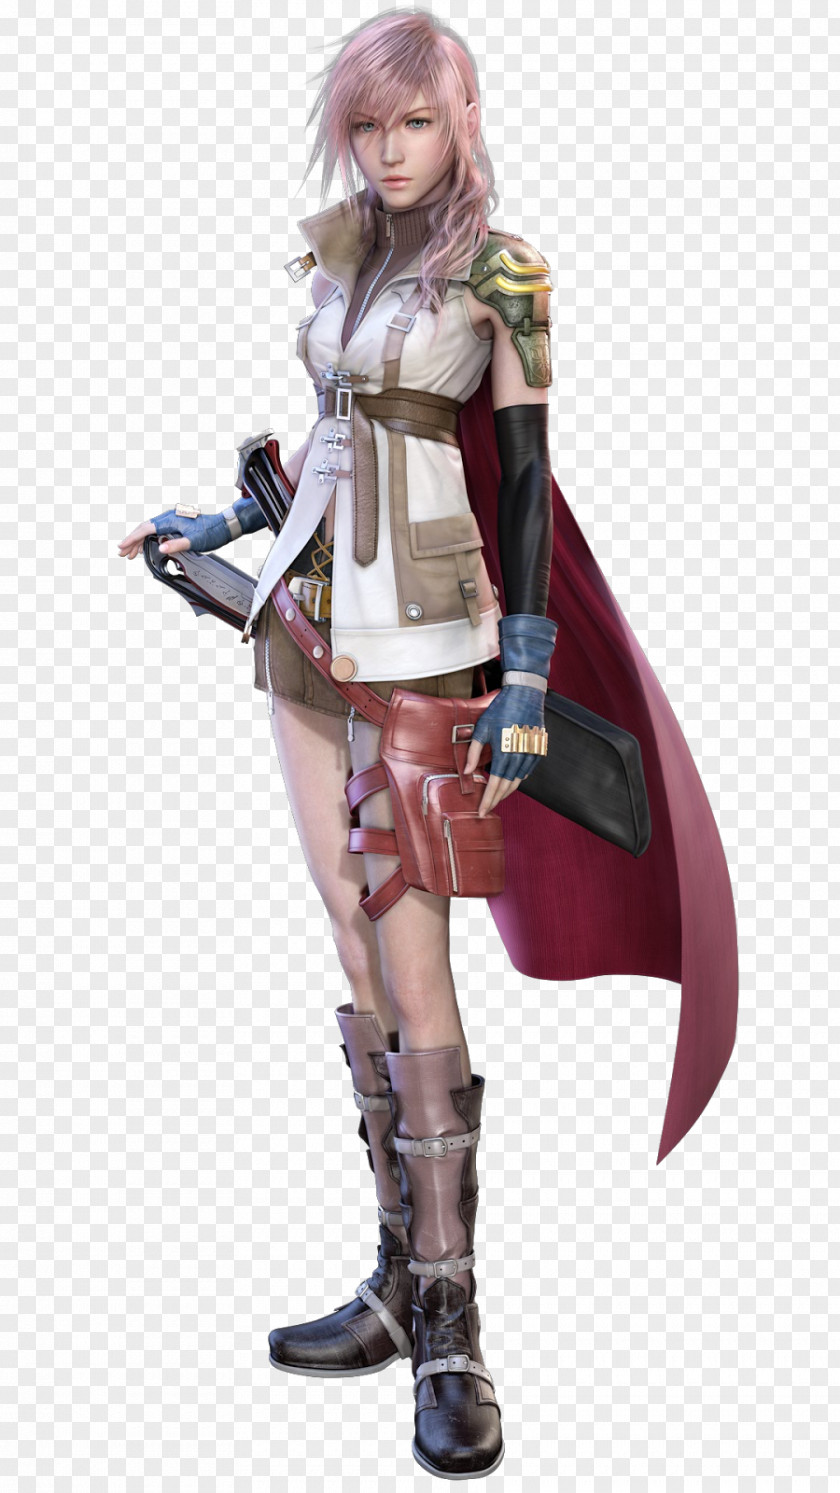 Layered Material Final Fantasy XIII Lightning Dissidia 012 VIII PNG